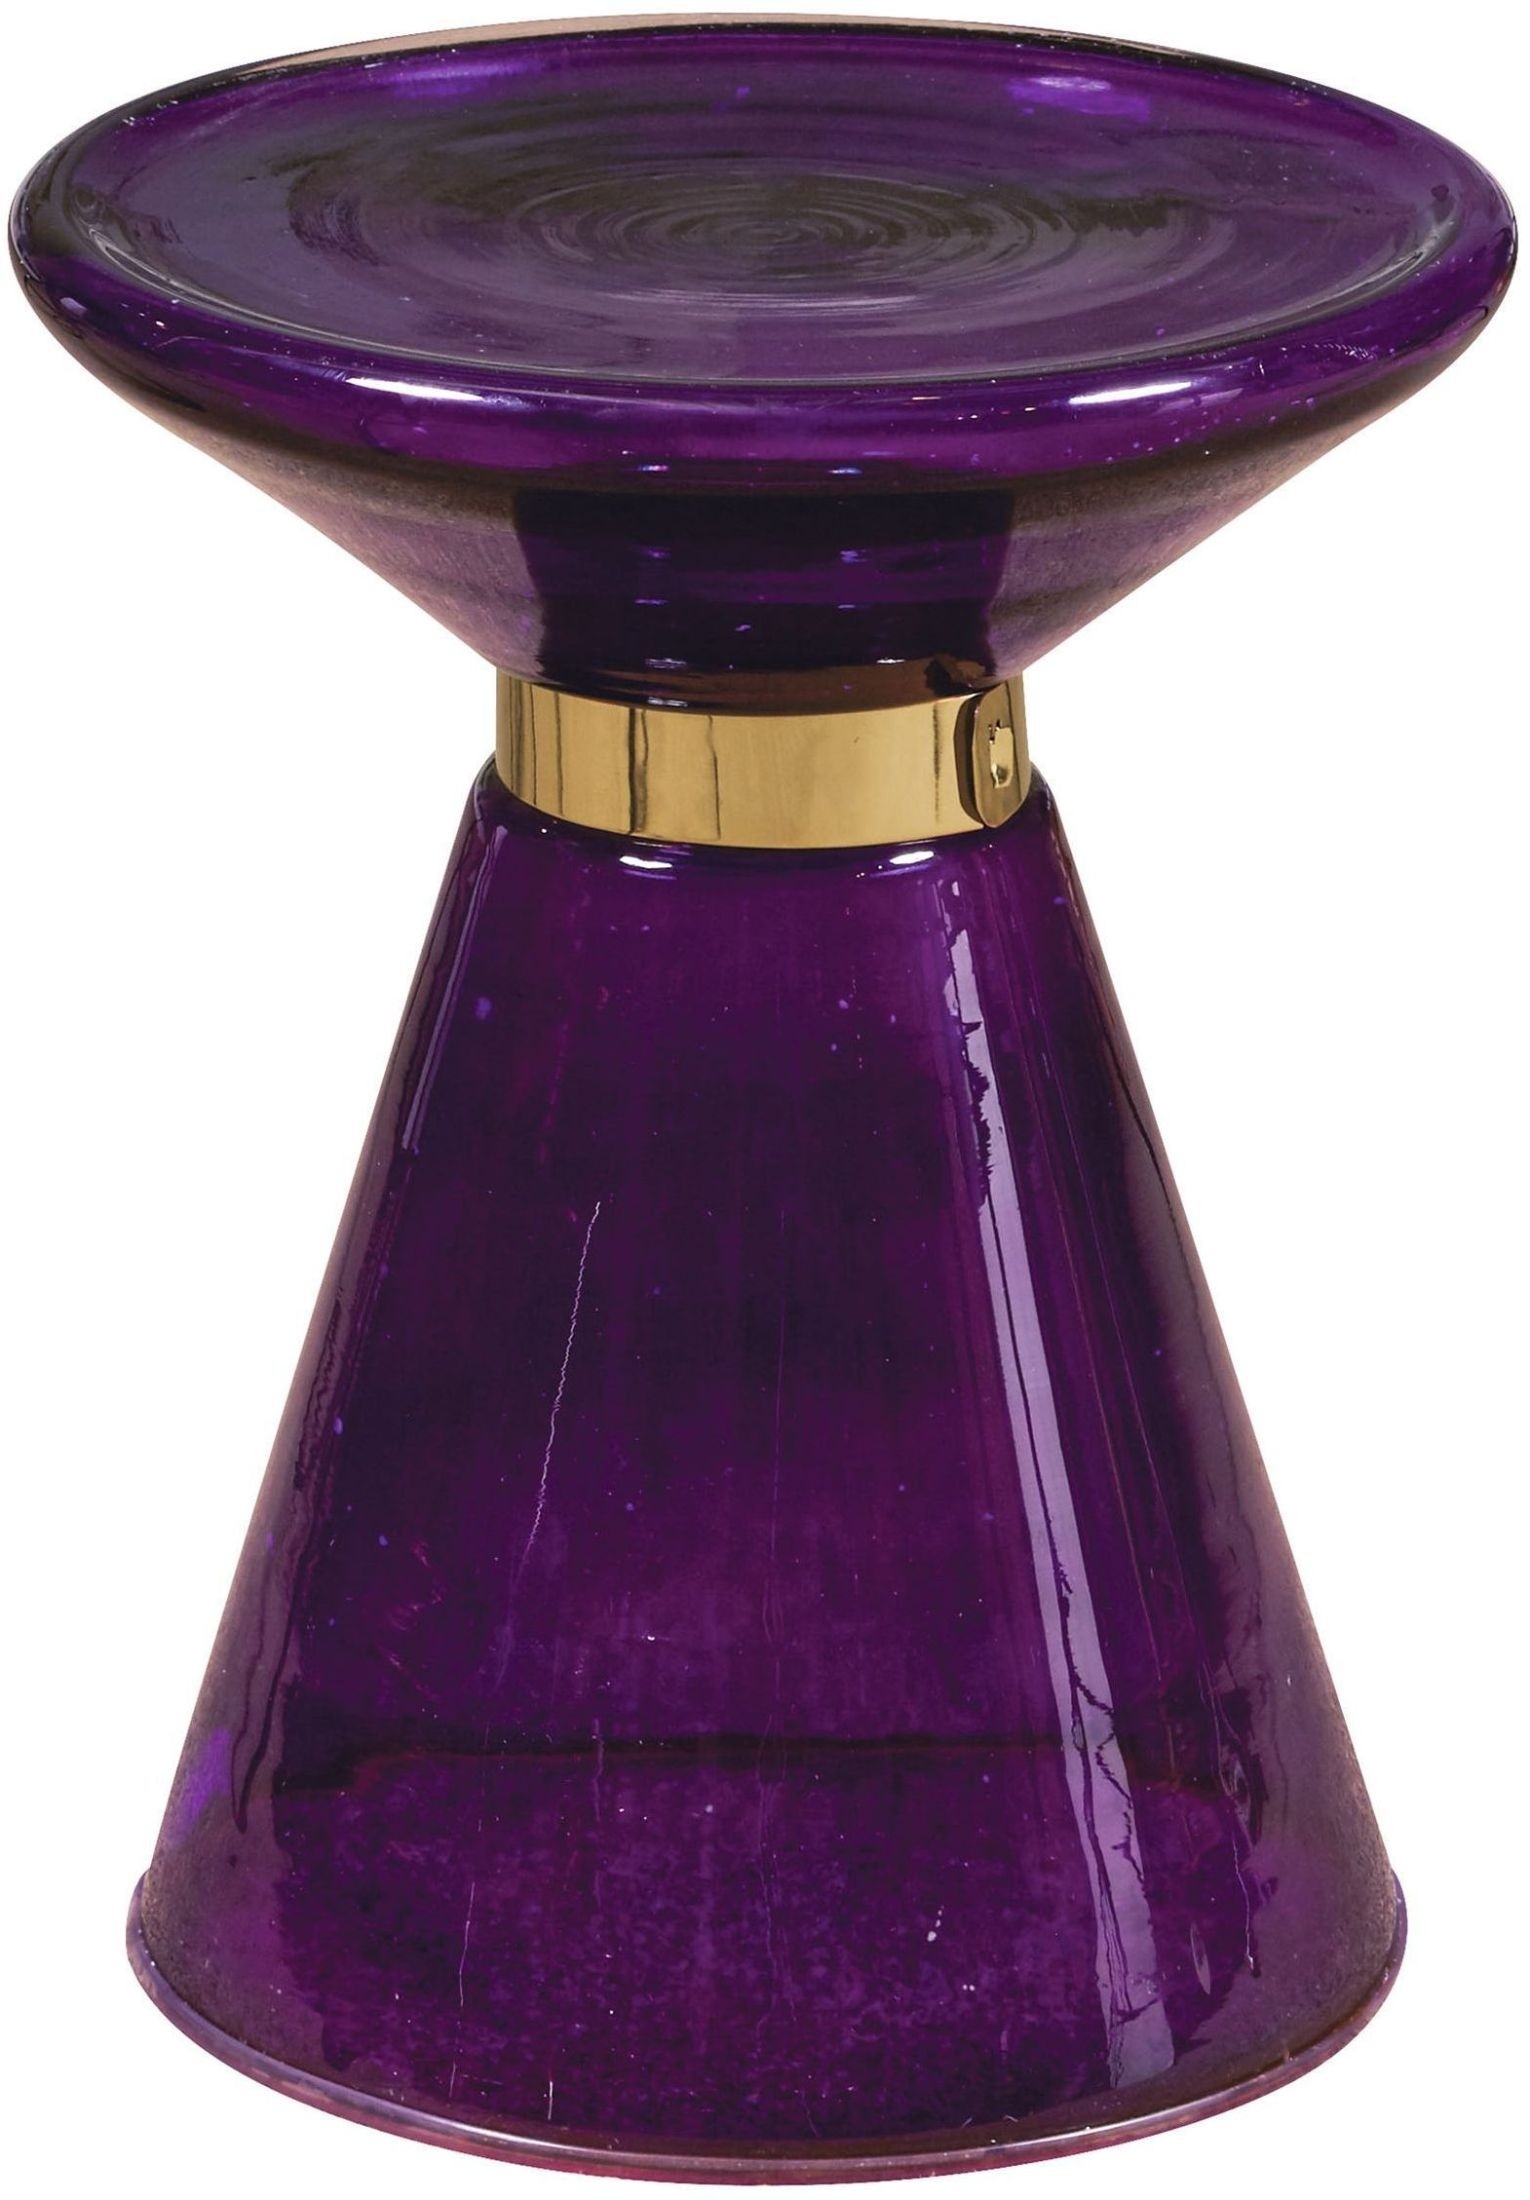 Bright purple glass side table accent tables